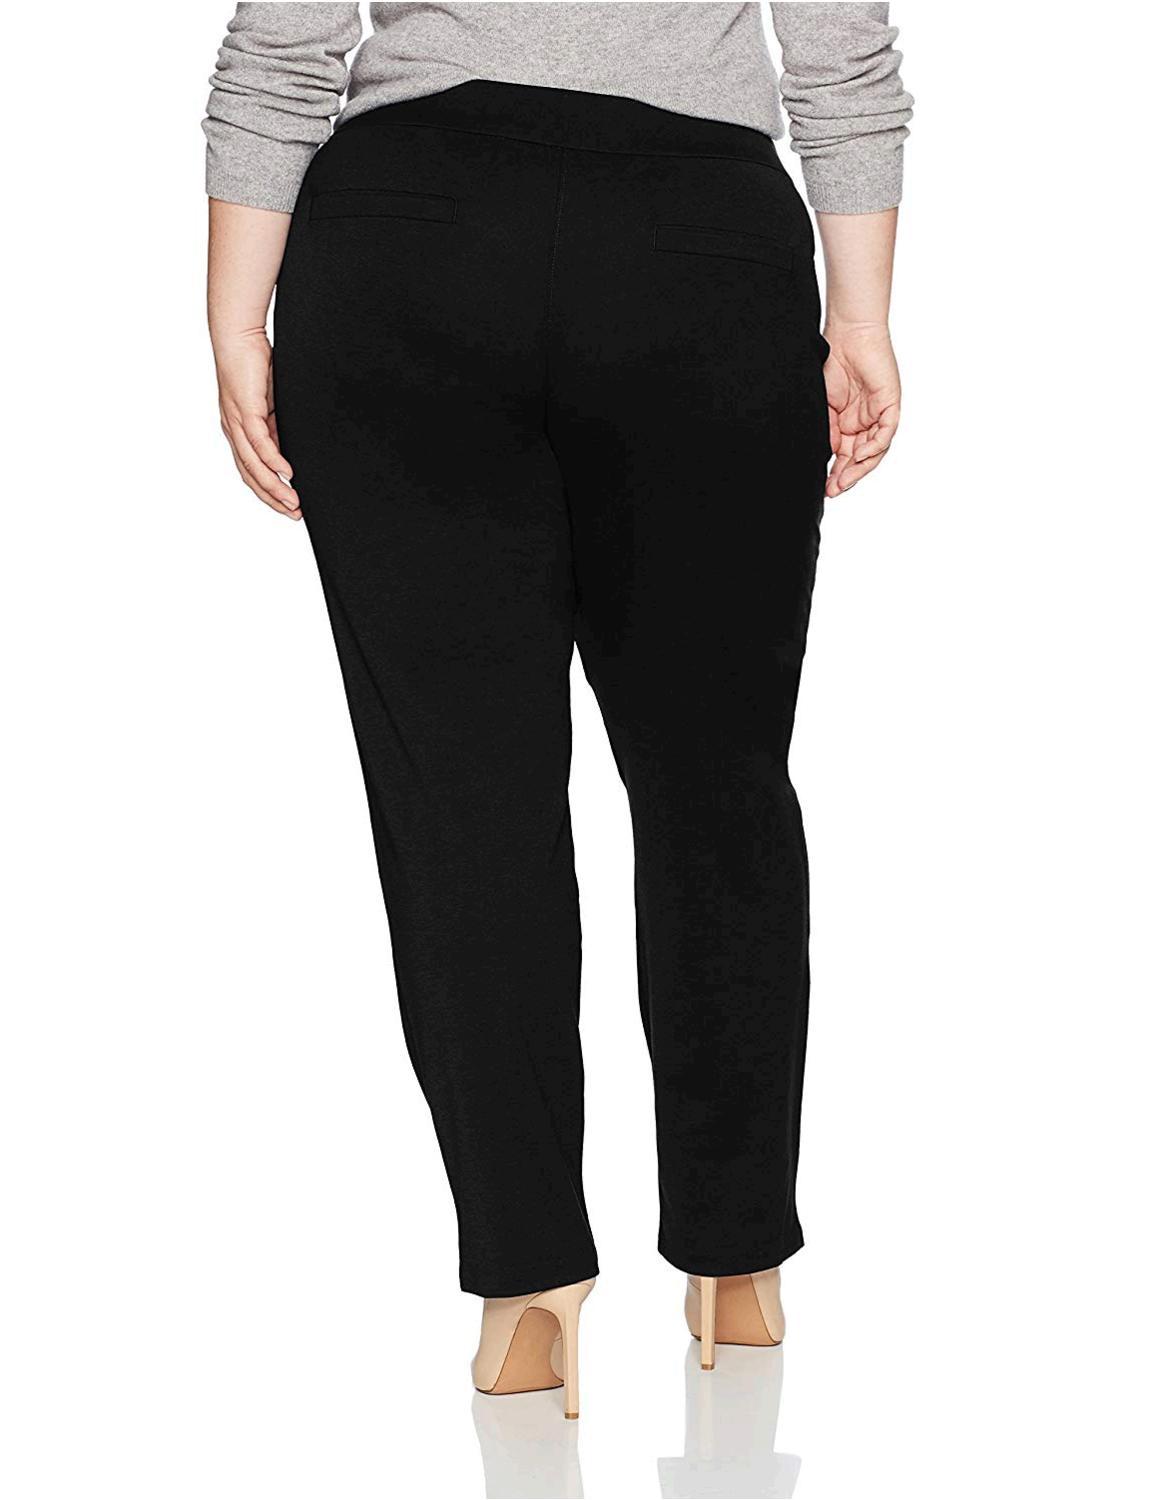 Chic Classic Collection Womens Plus Size Knit Pull On Pant Black